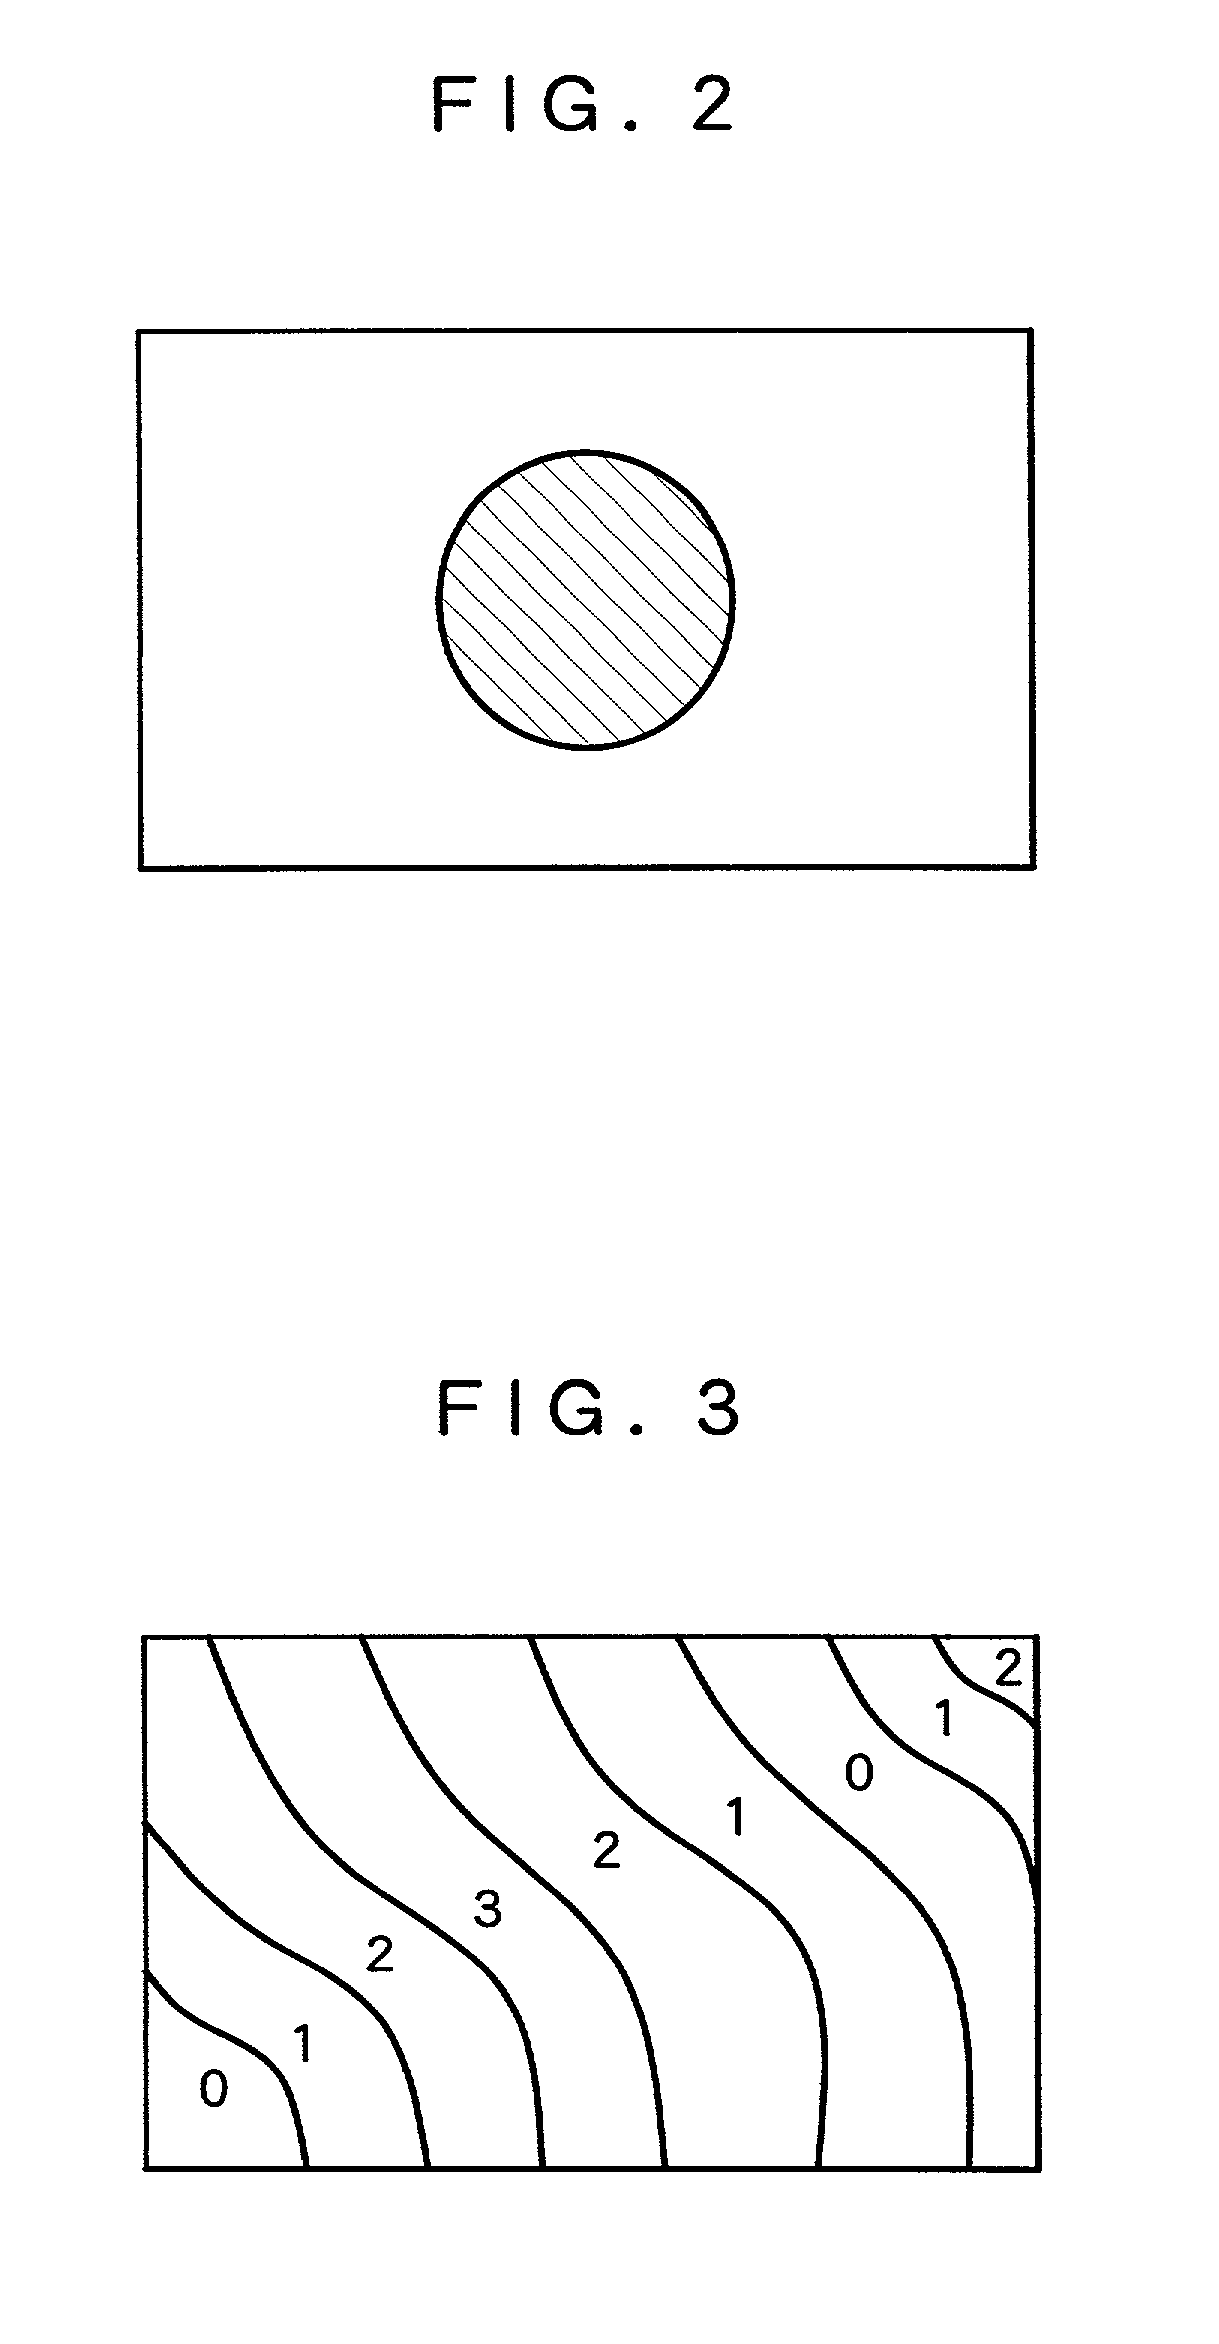 Image processing device and method for generating changes in the light and shade pattern of an image